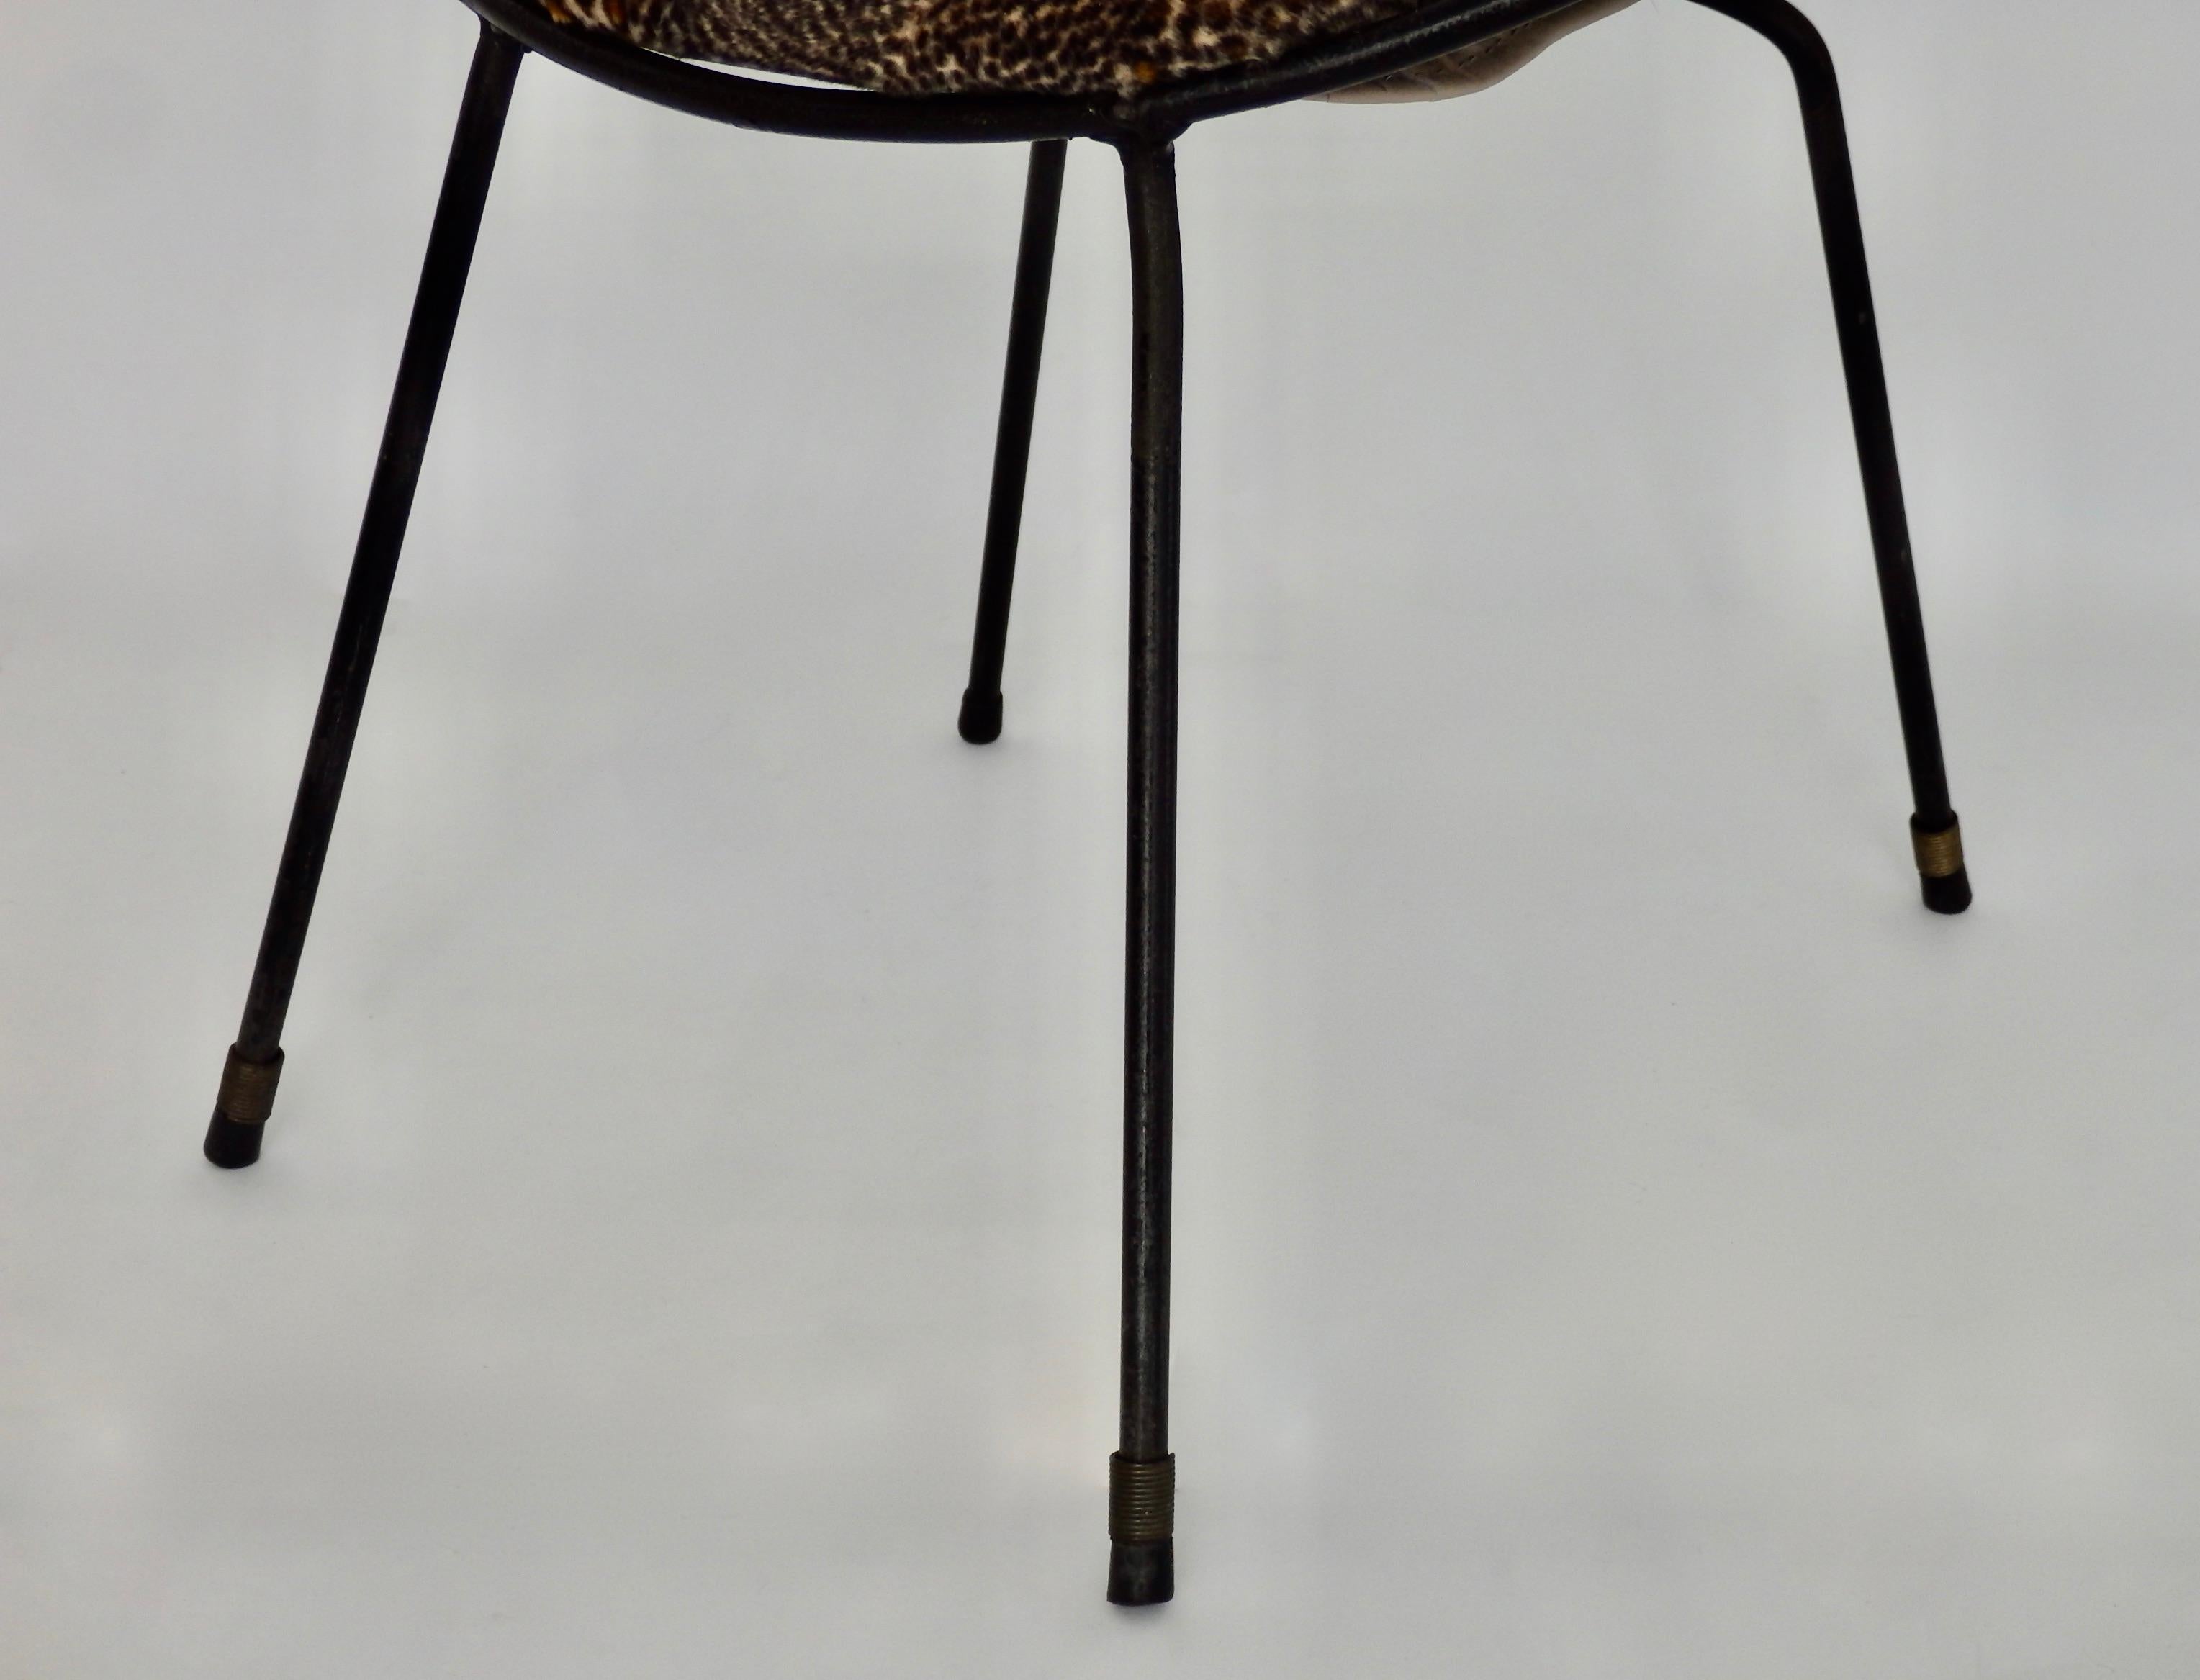 Children's Wrought Iron Hoop Chair, Attributed to Tony Paul 2